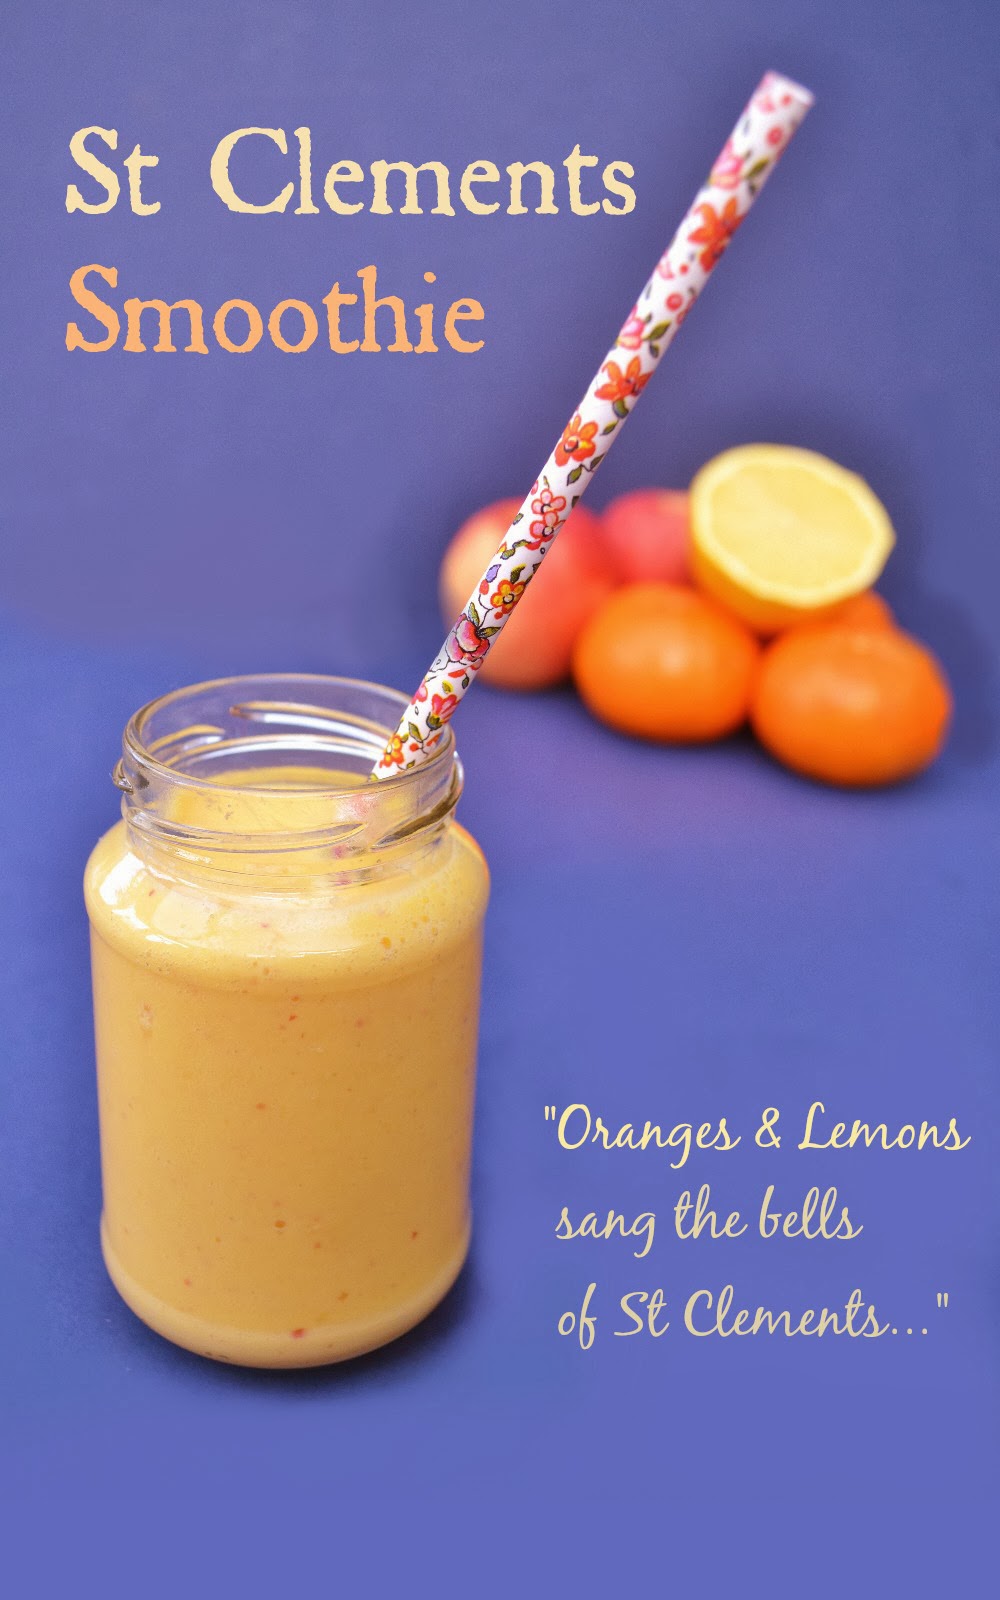 St Clements Smoothie